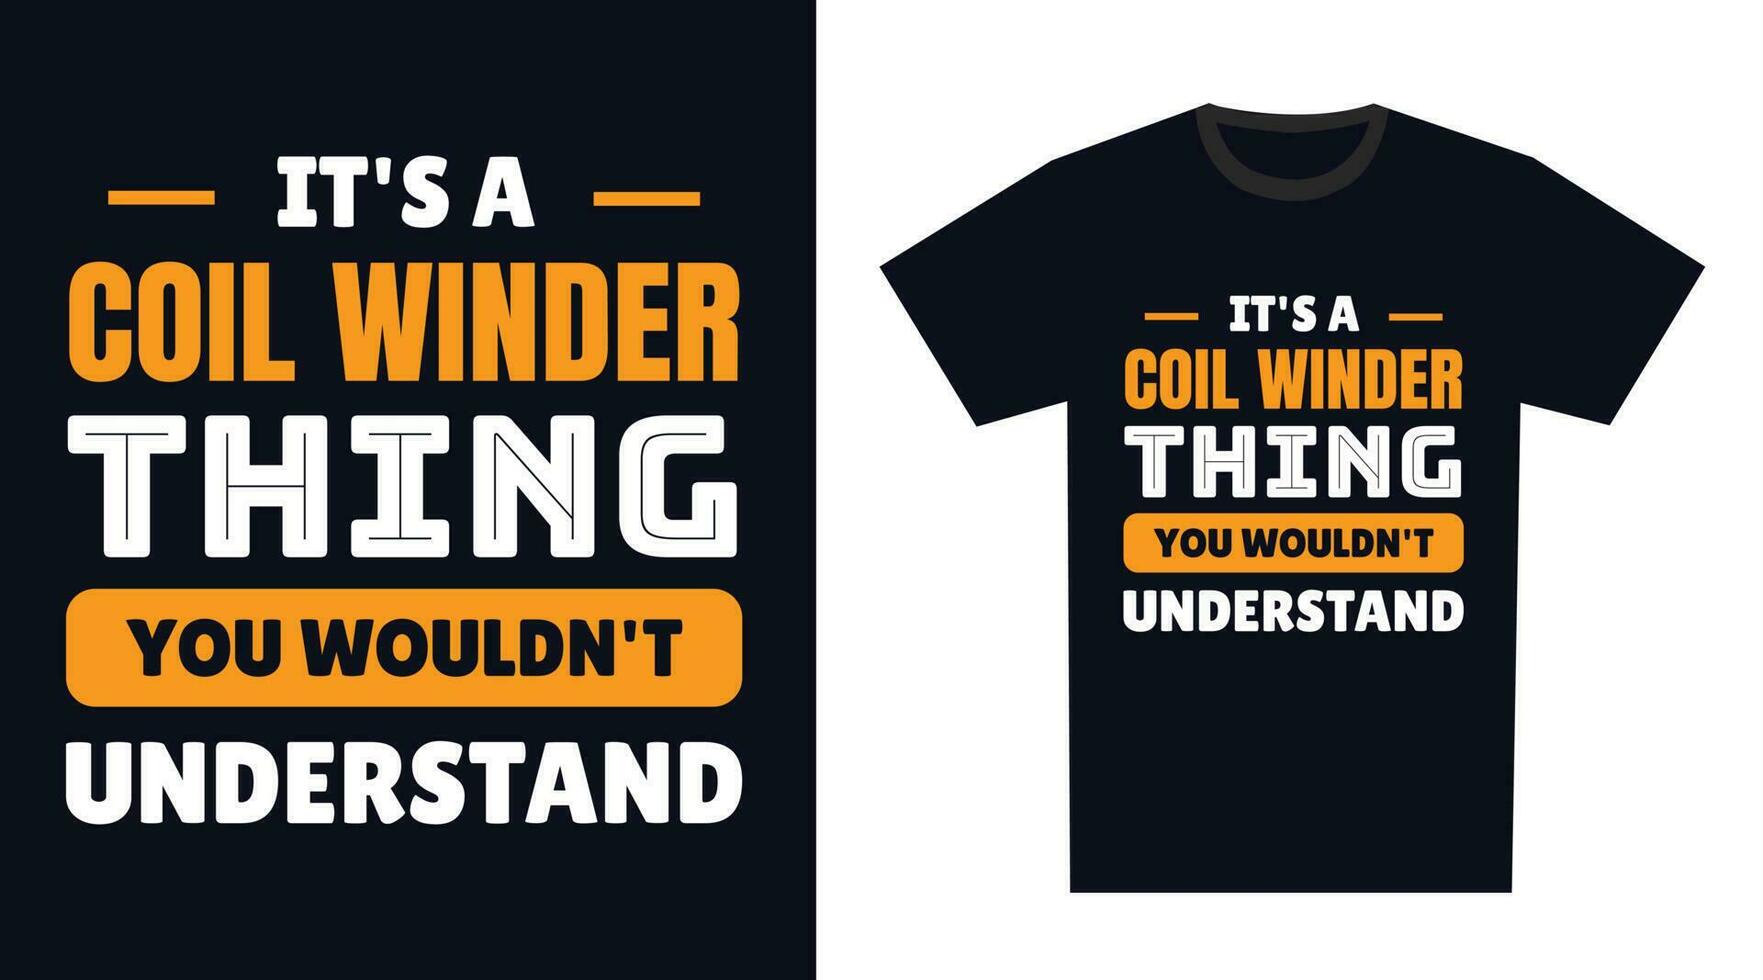 Coil Winder T Shirt Design. It's a Coil Winder Thing, You Wouldn't Understand vector